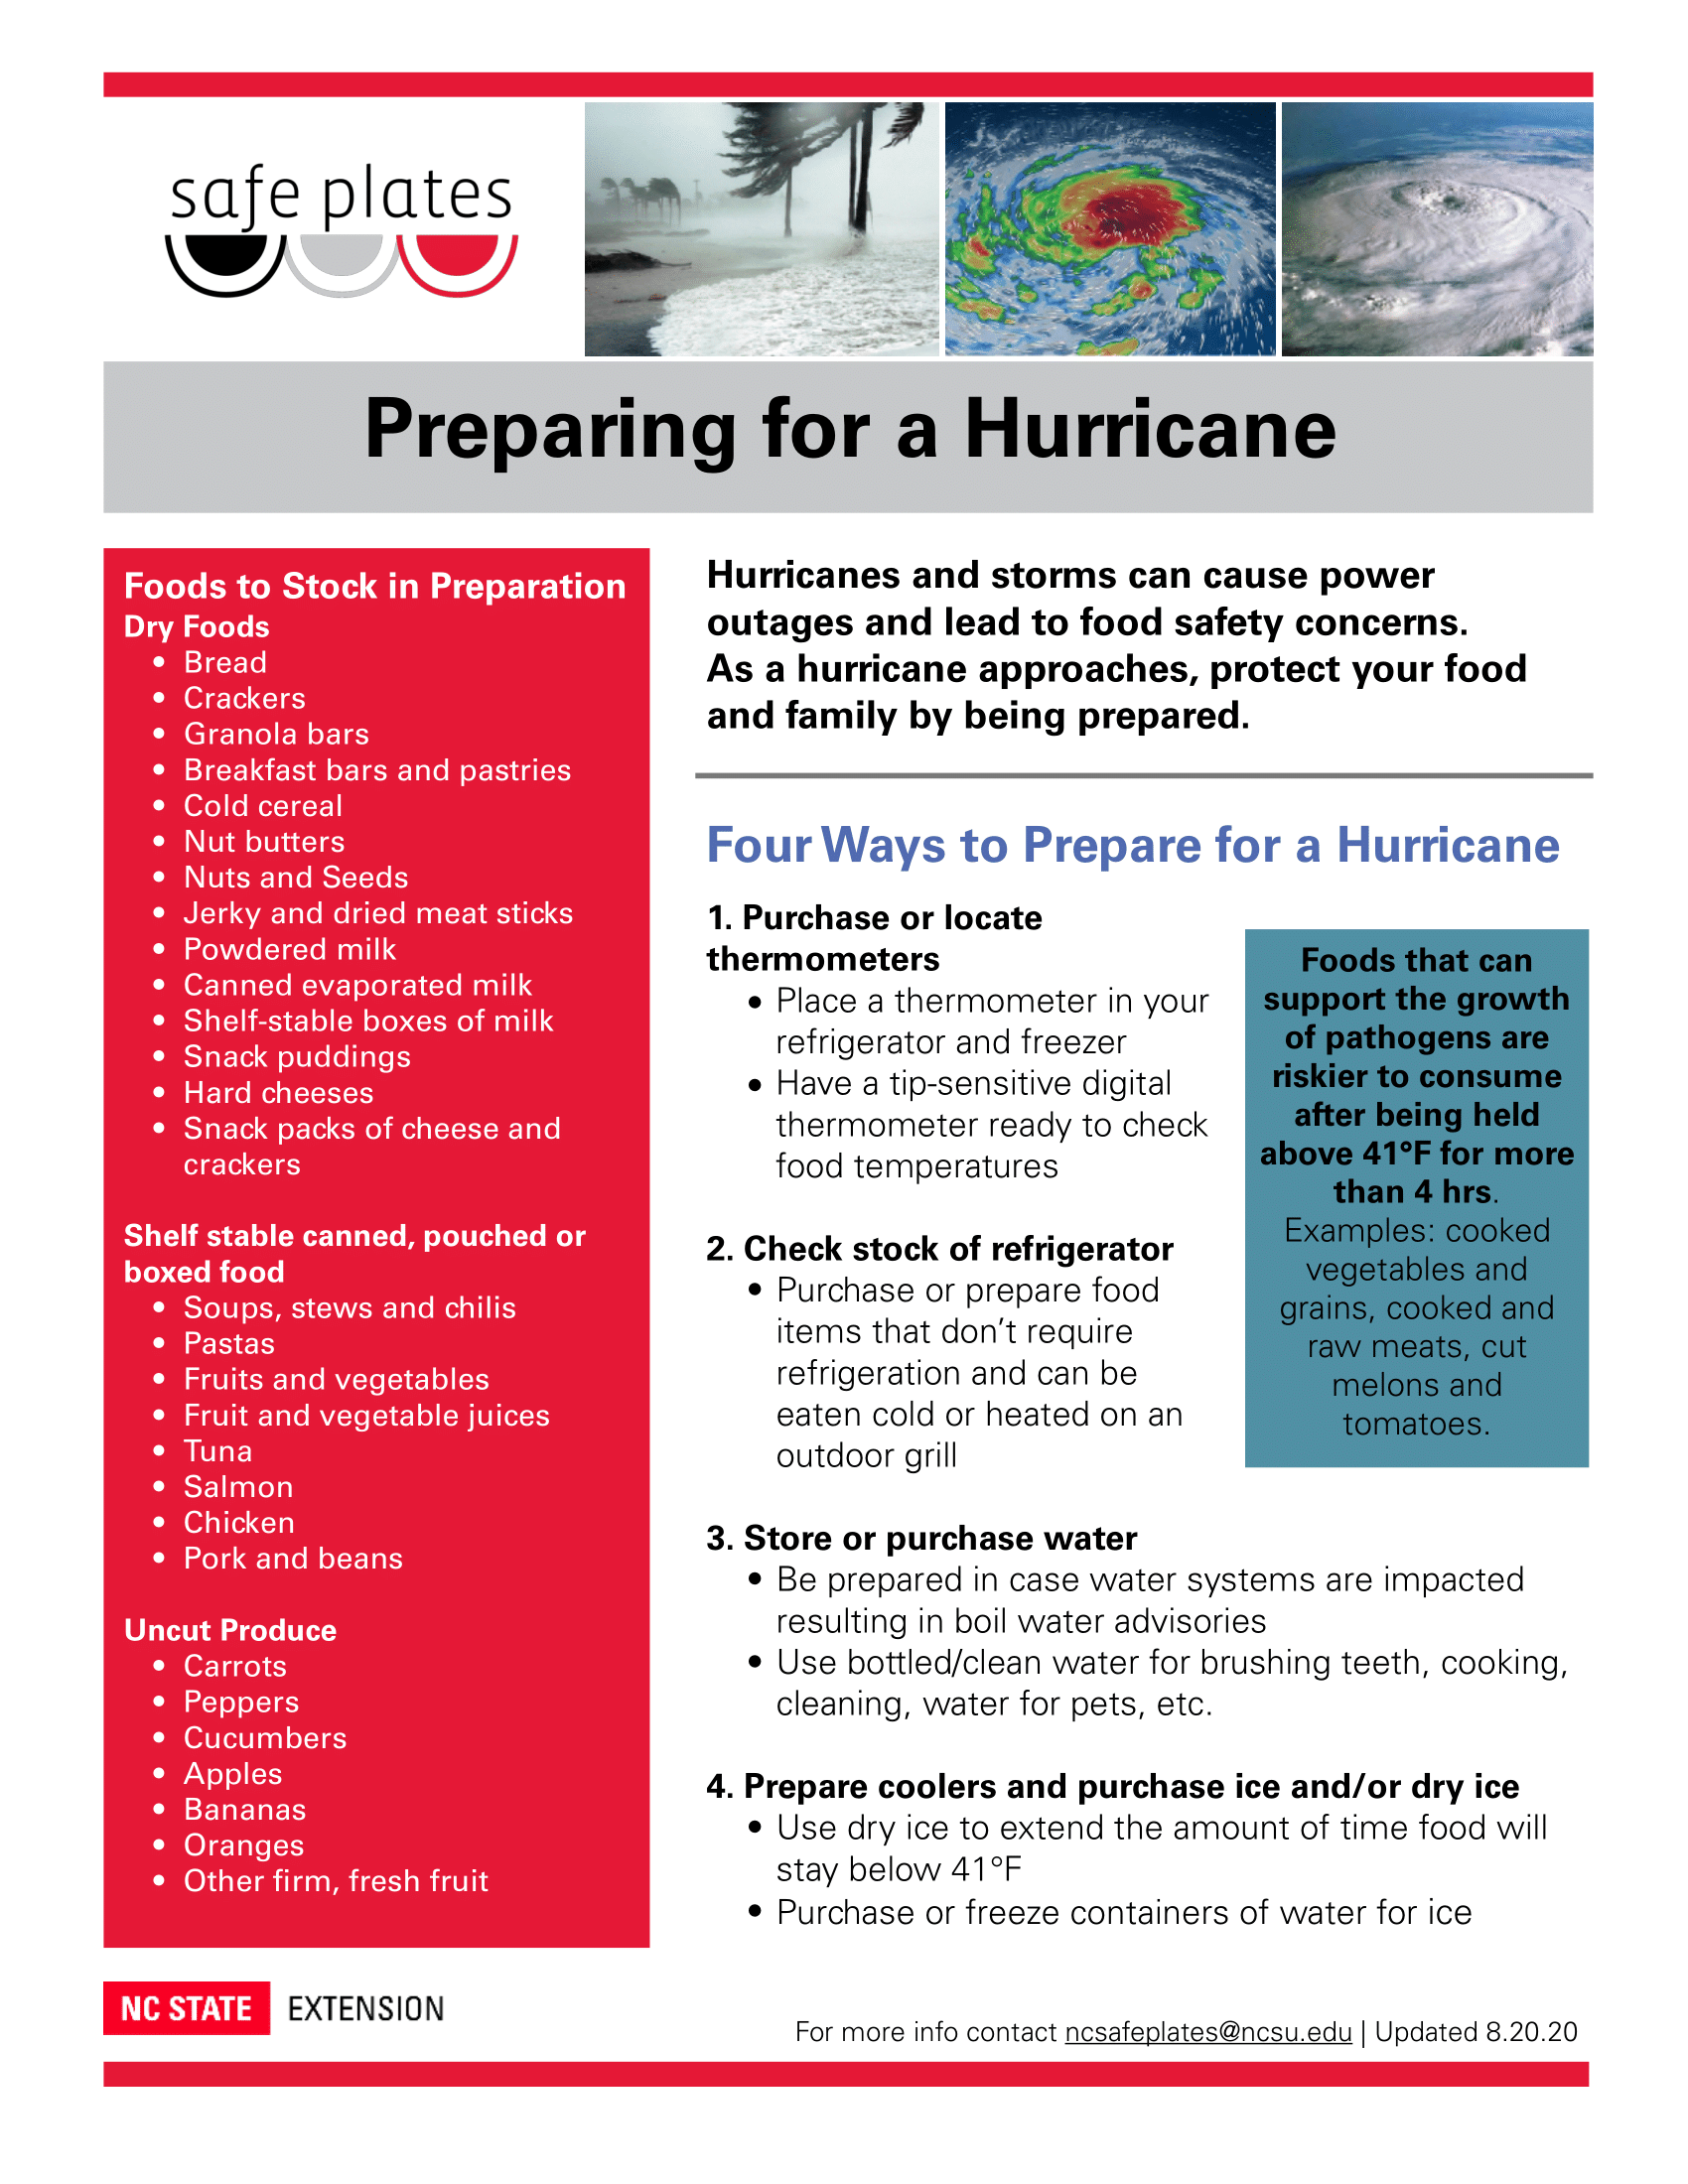 Preparing for a Hurricane Handout. Links to PDF from Safe Plates